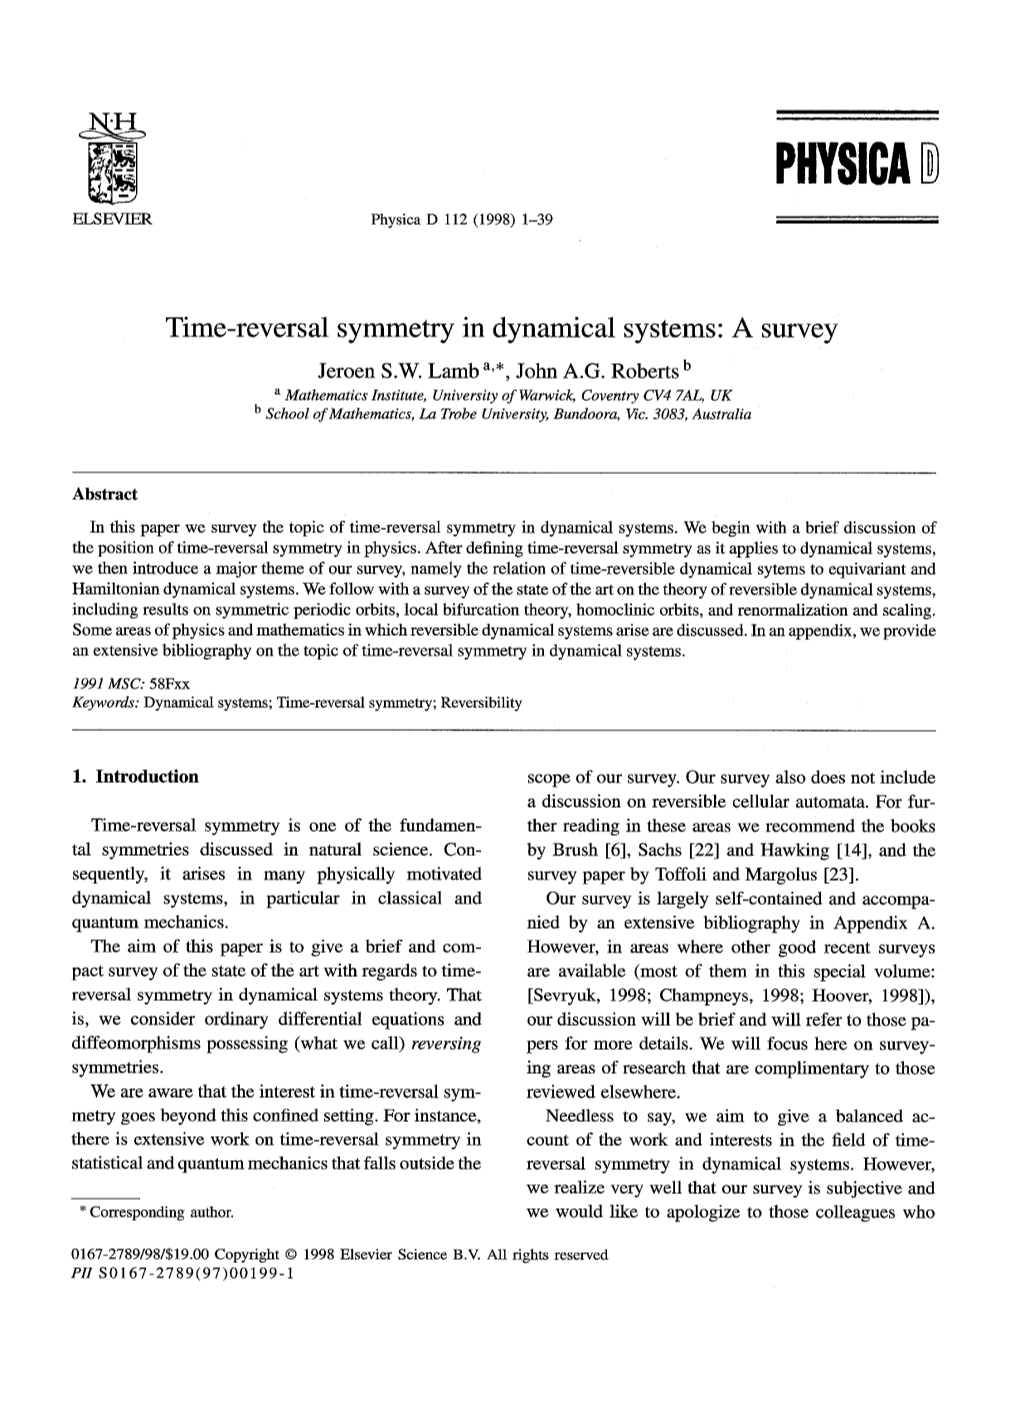 PHYSICA Time-Reversal Symmetry in Dynamical Systems